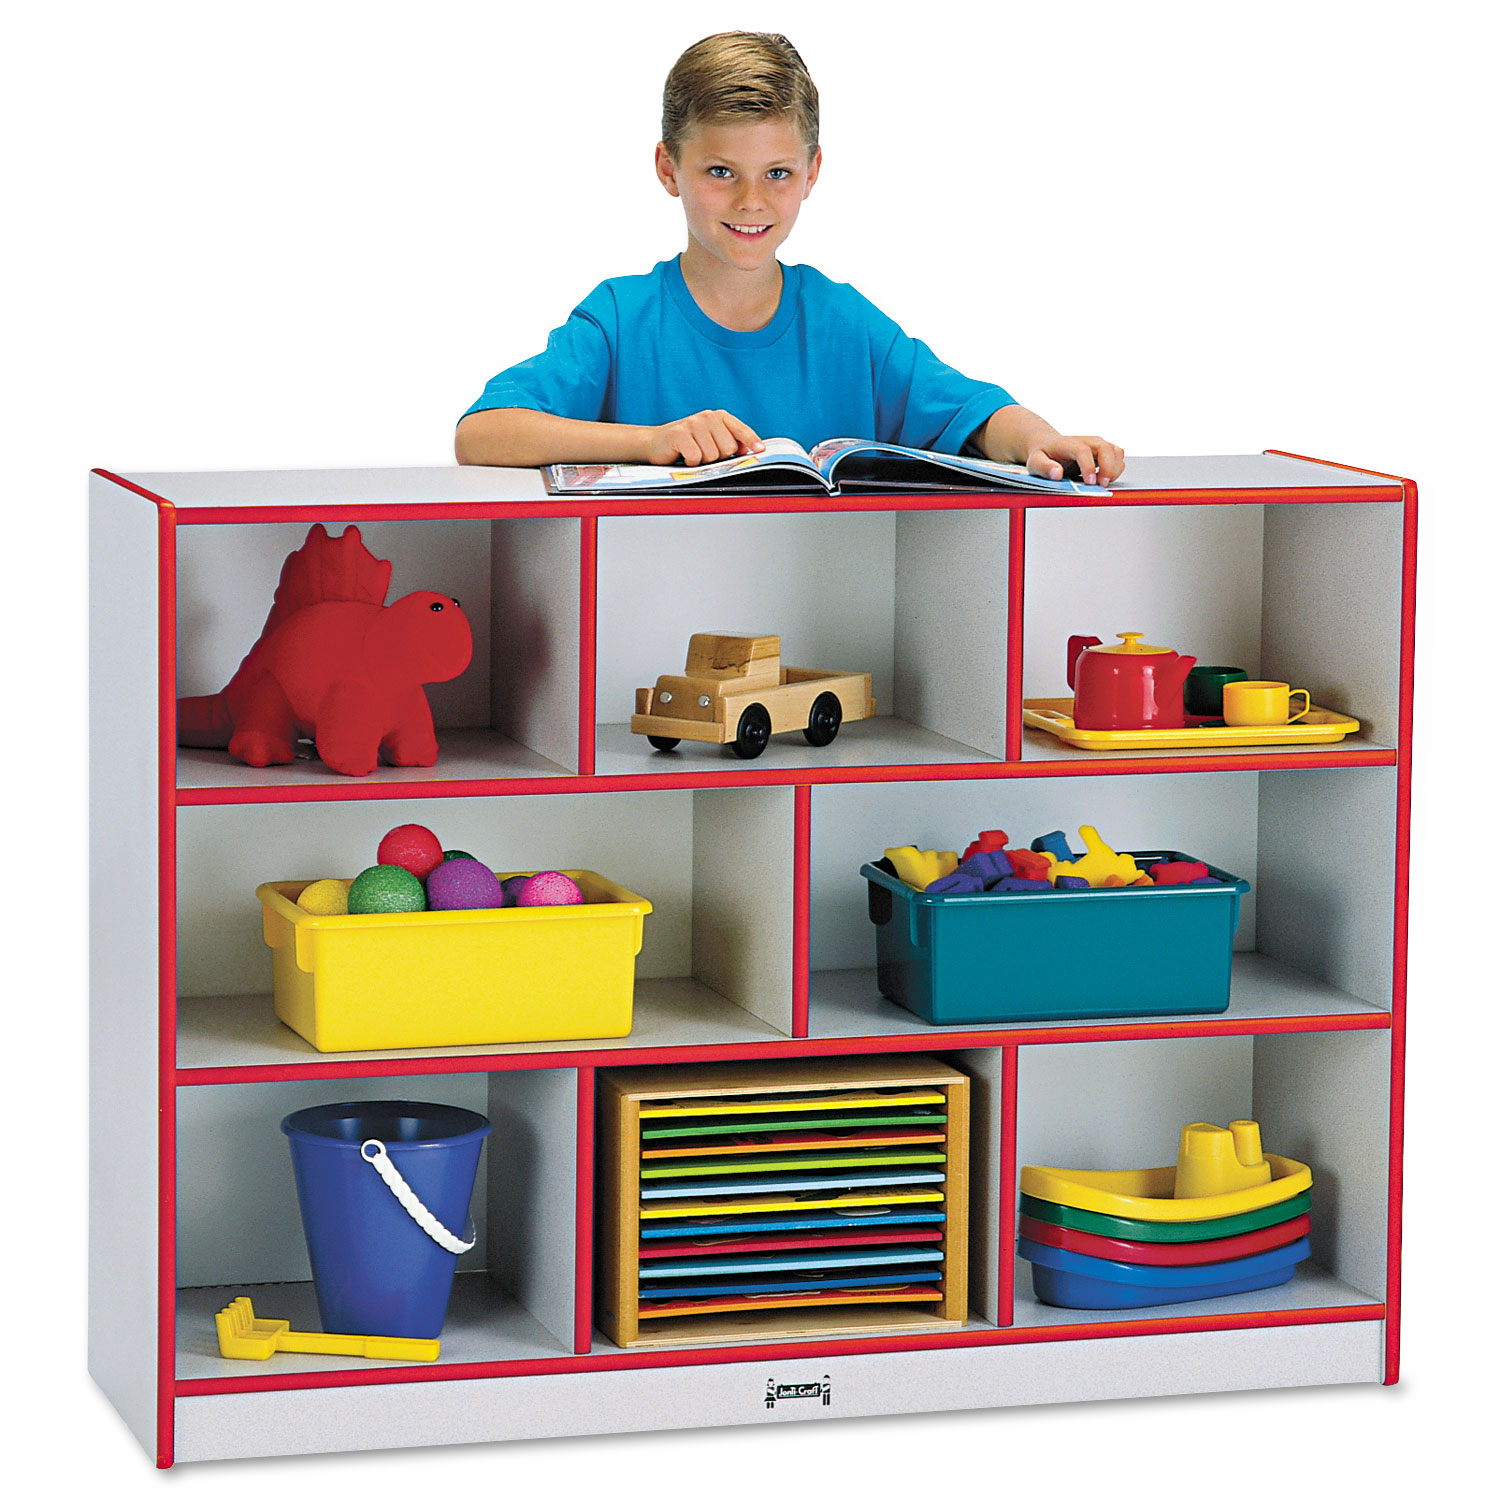 Rainbow Accents Single Storage Units, 48w x 15d x 35-1/2h, Red/Freckled Gray